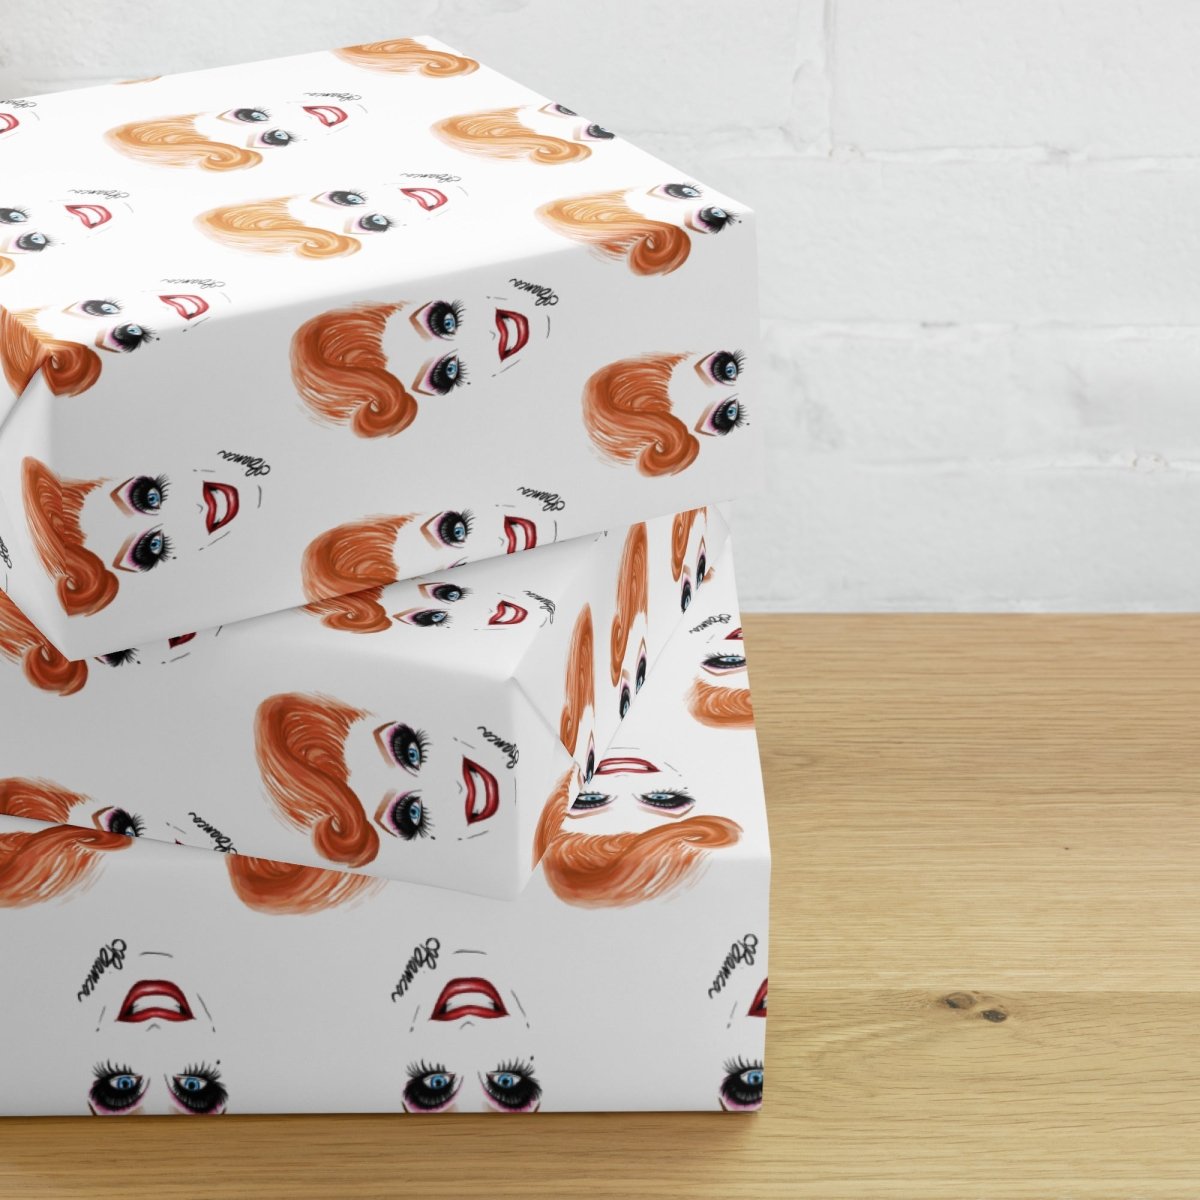 Bianca Del Rio - Signature Wrapping paper sheets - dragqueenmerch